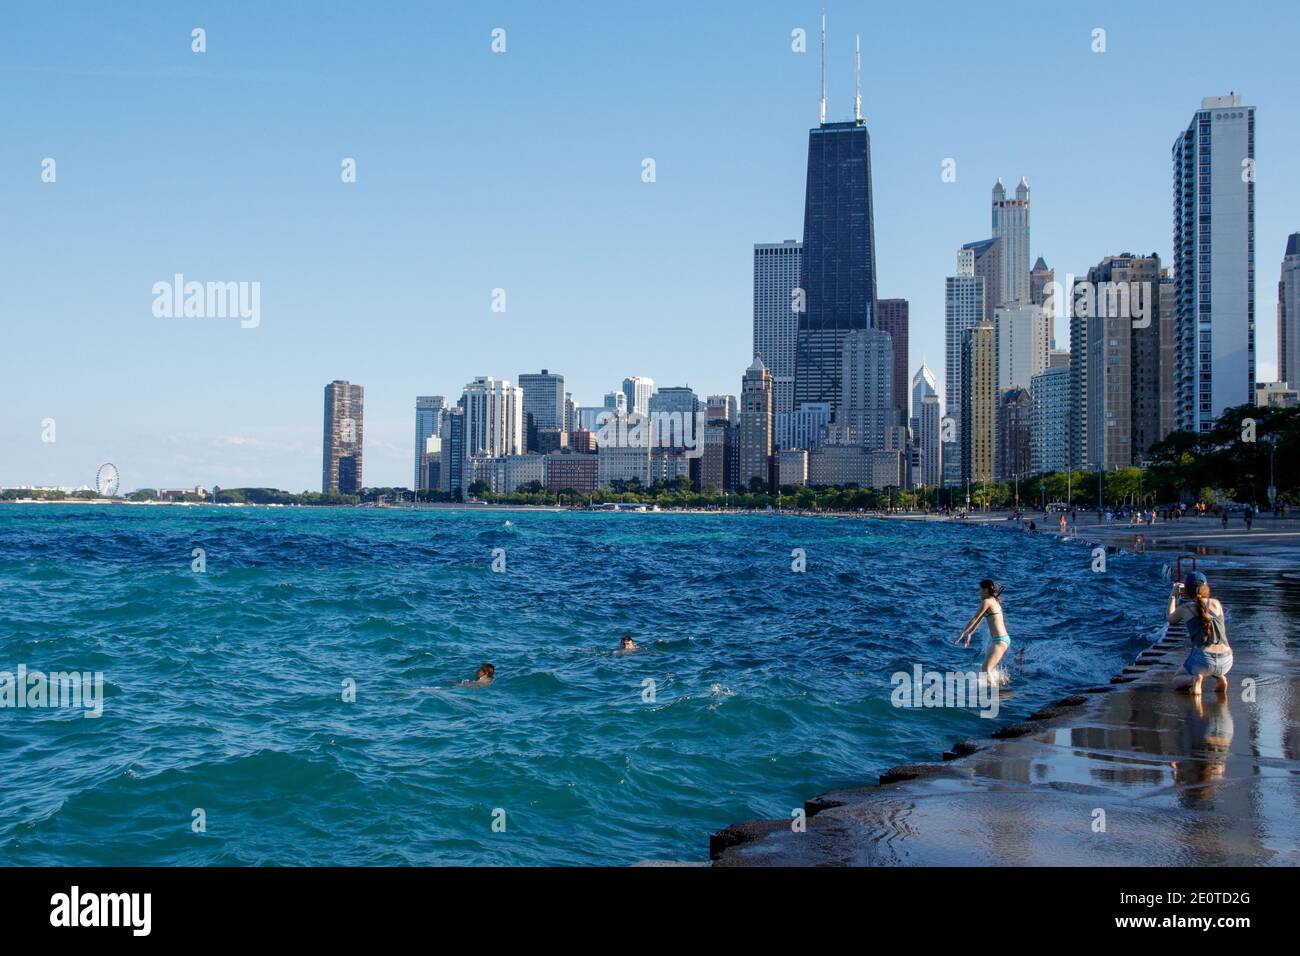 Chicago lakefront near North Avenue Beach. Young woman jumping from seawall into lake. Stock Photo